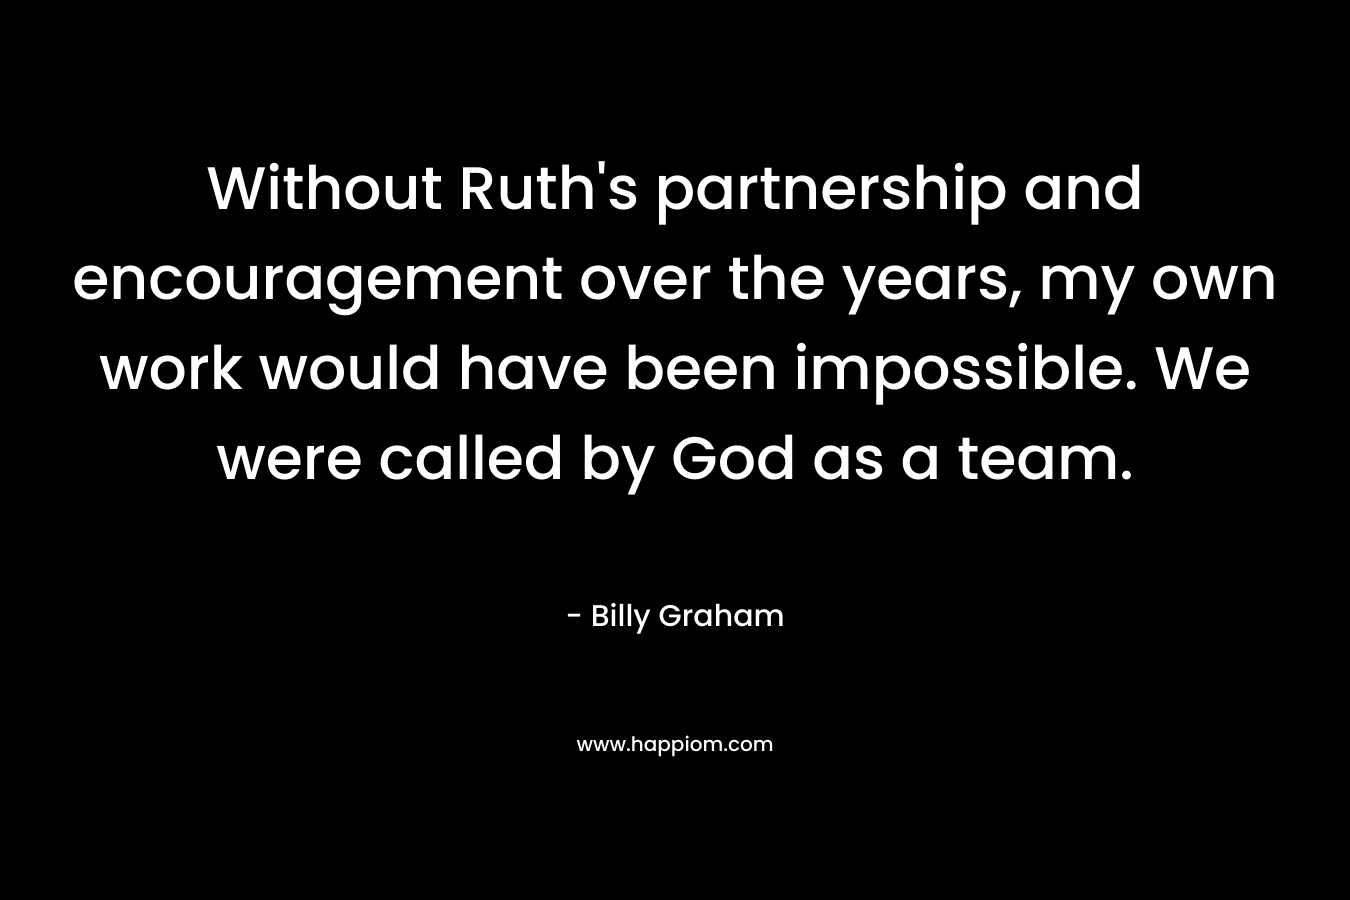 Without Ruth's partnership and encouragement over the years, my own work would have been impossible. We were called by God as a team.